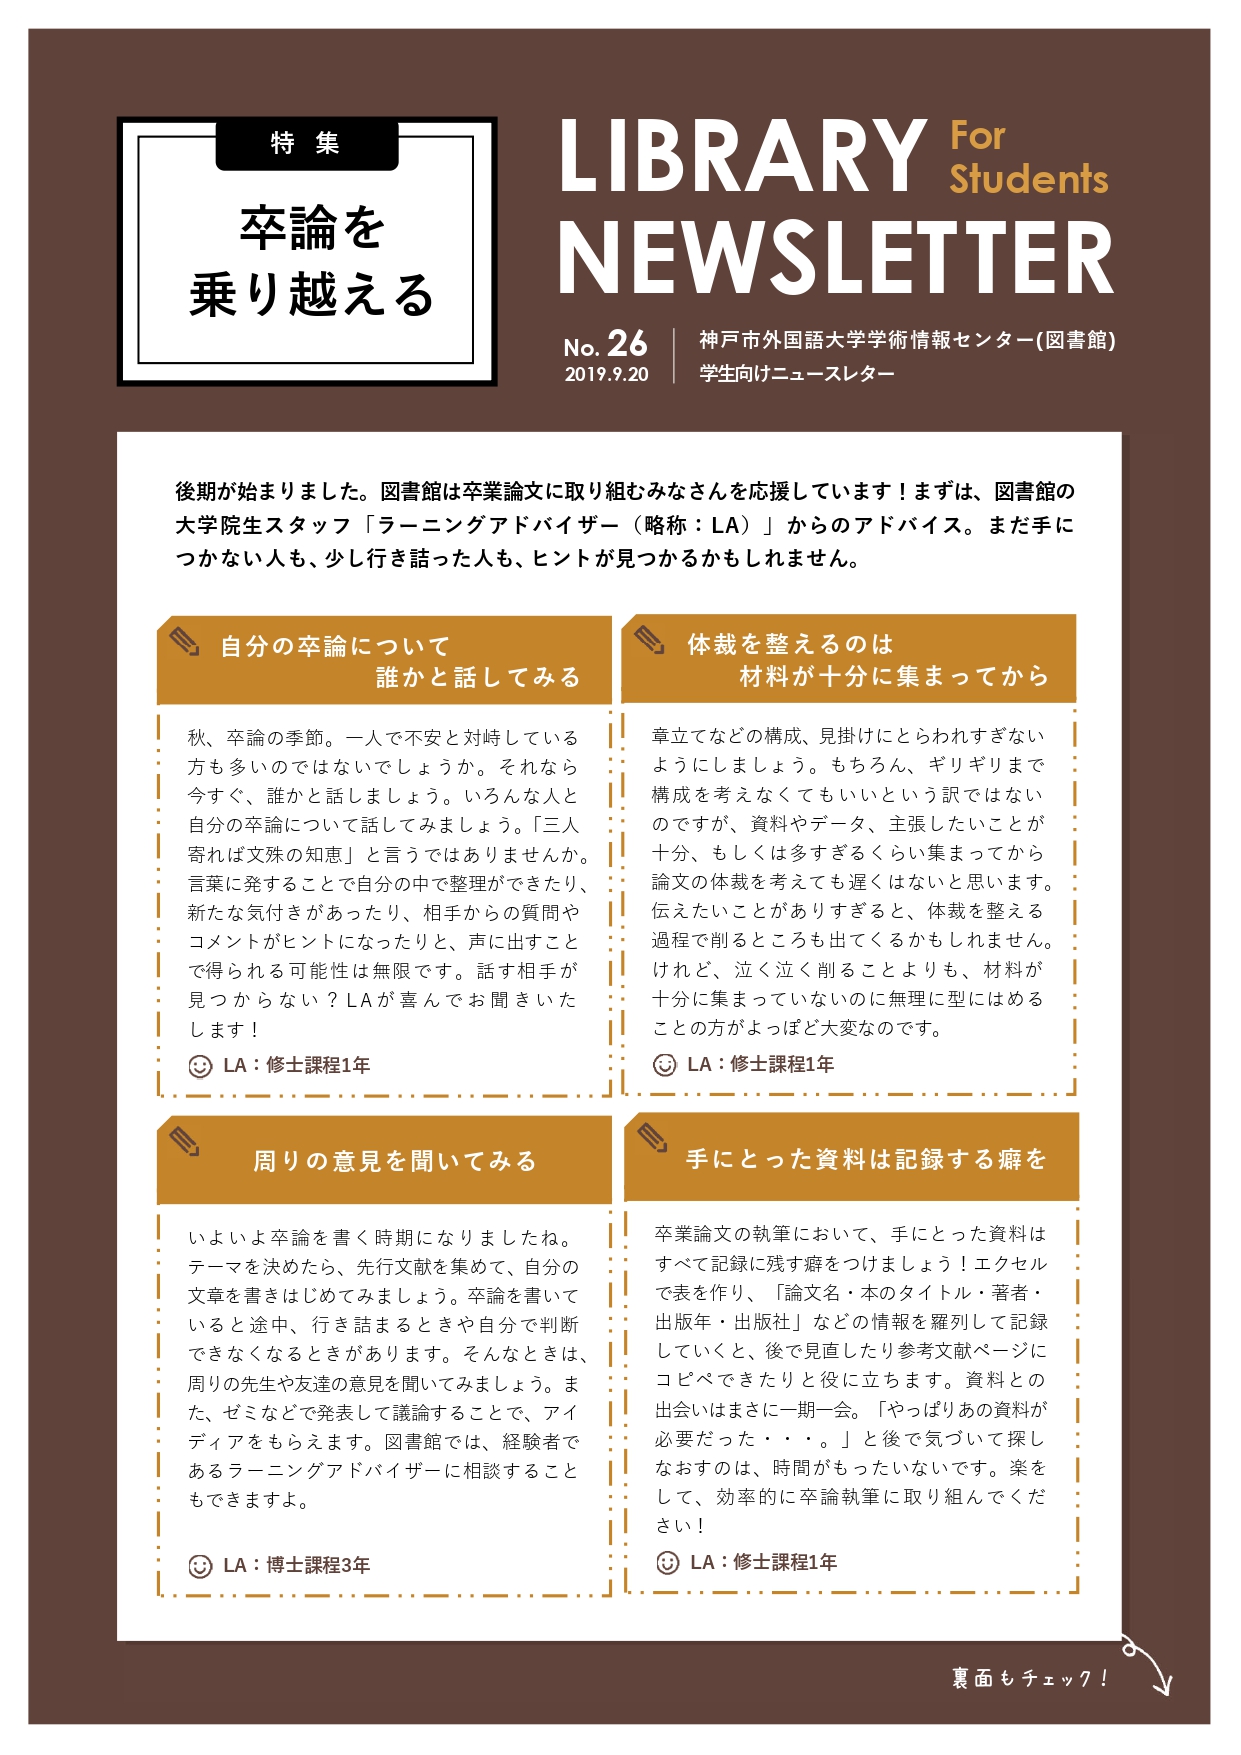 「LIBRARY NEWSLETTER No.26」(表)